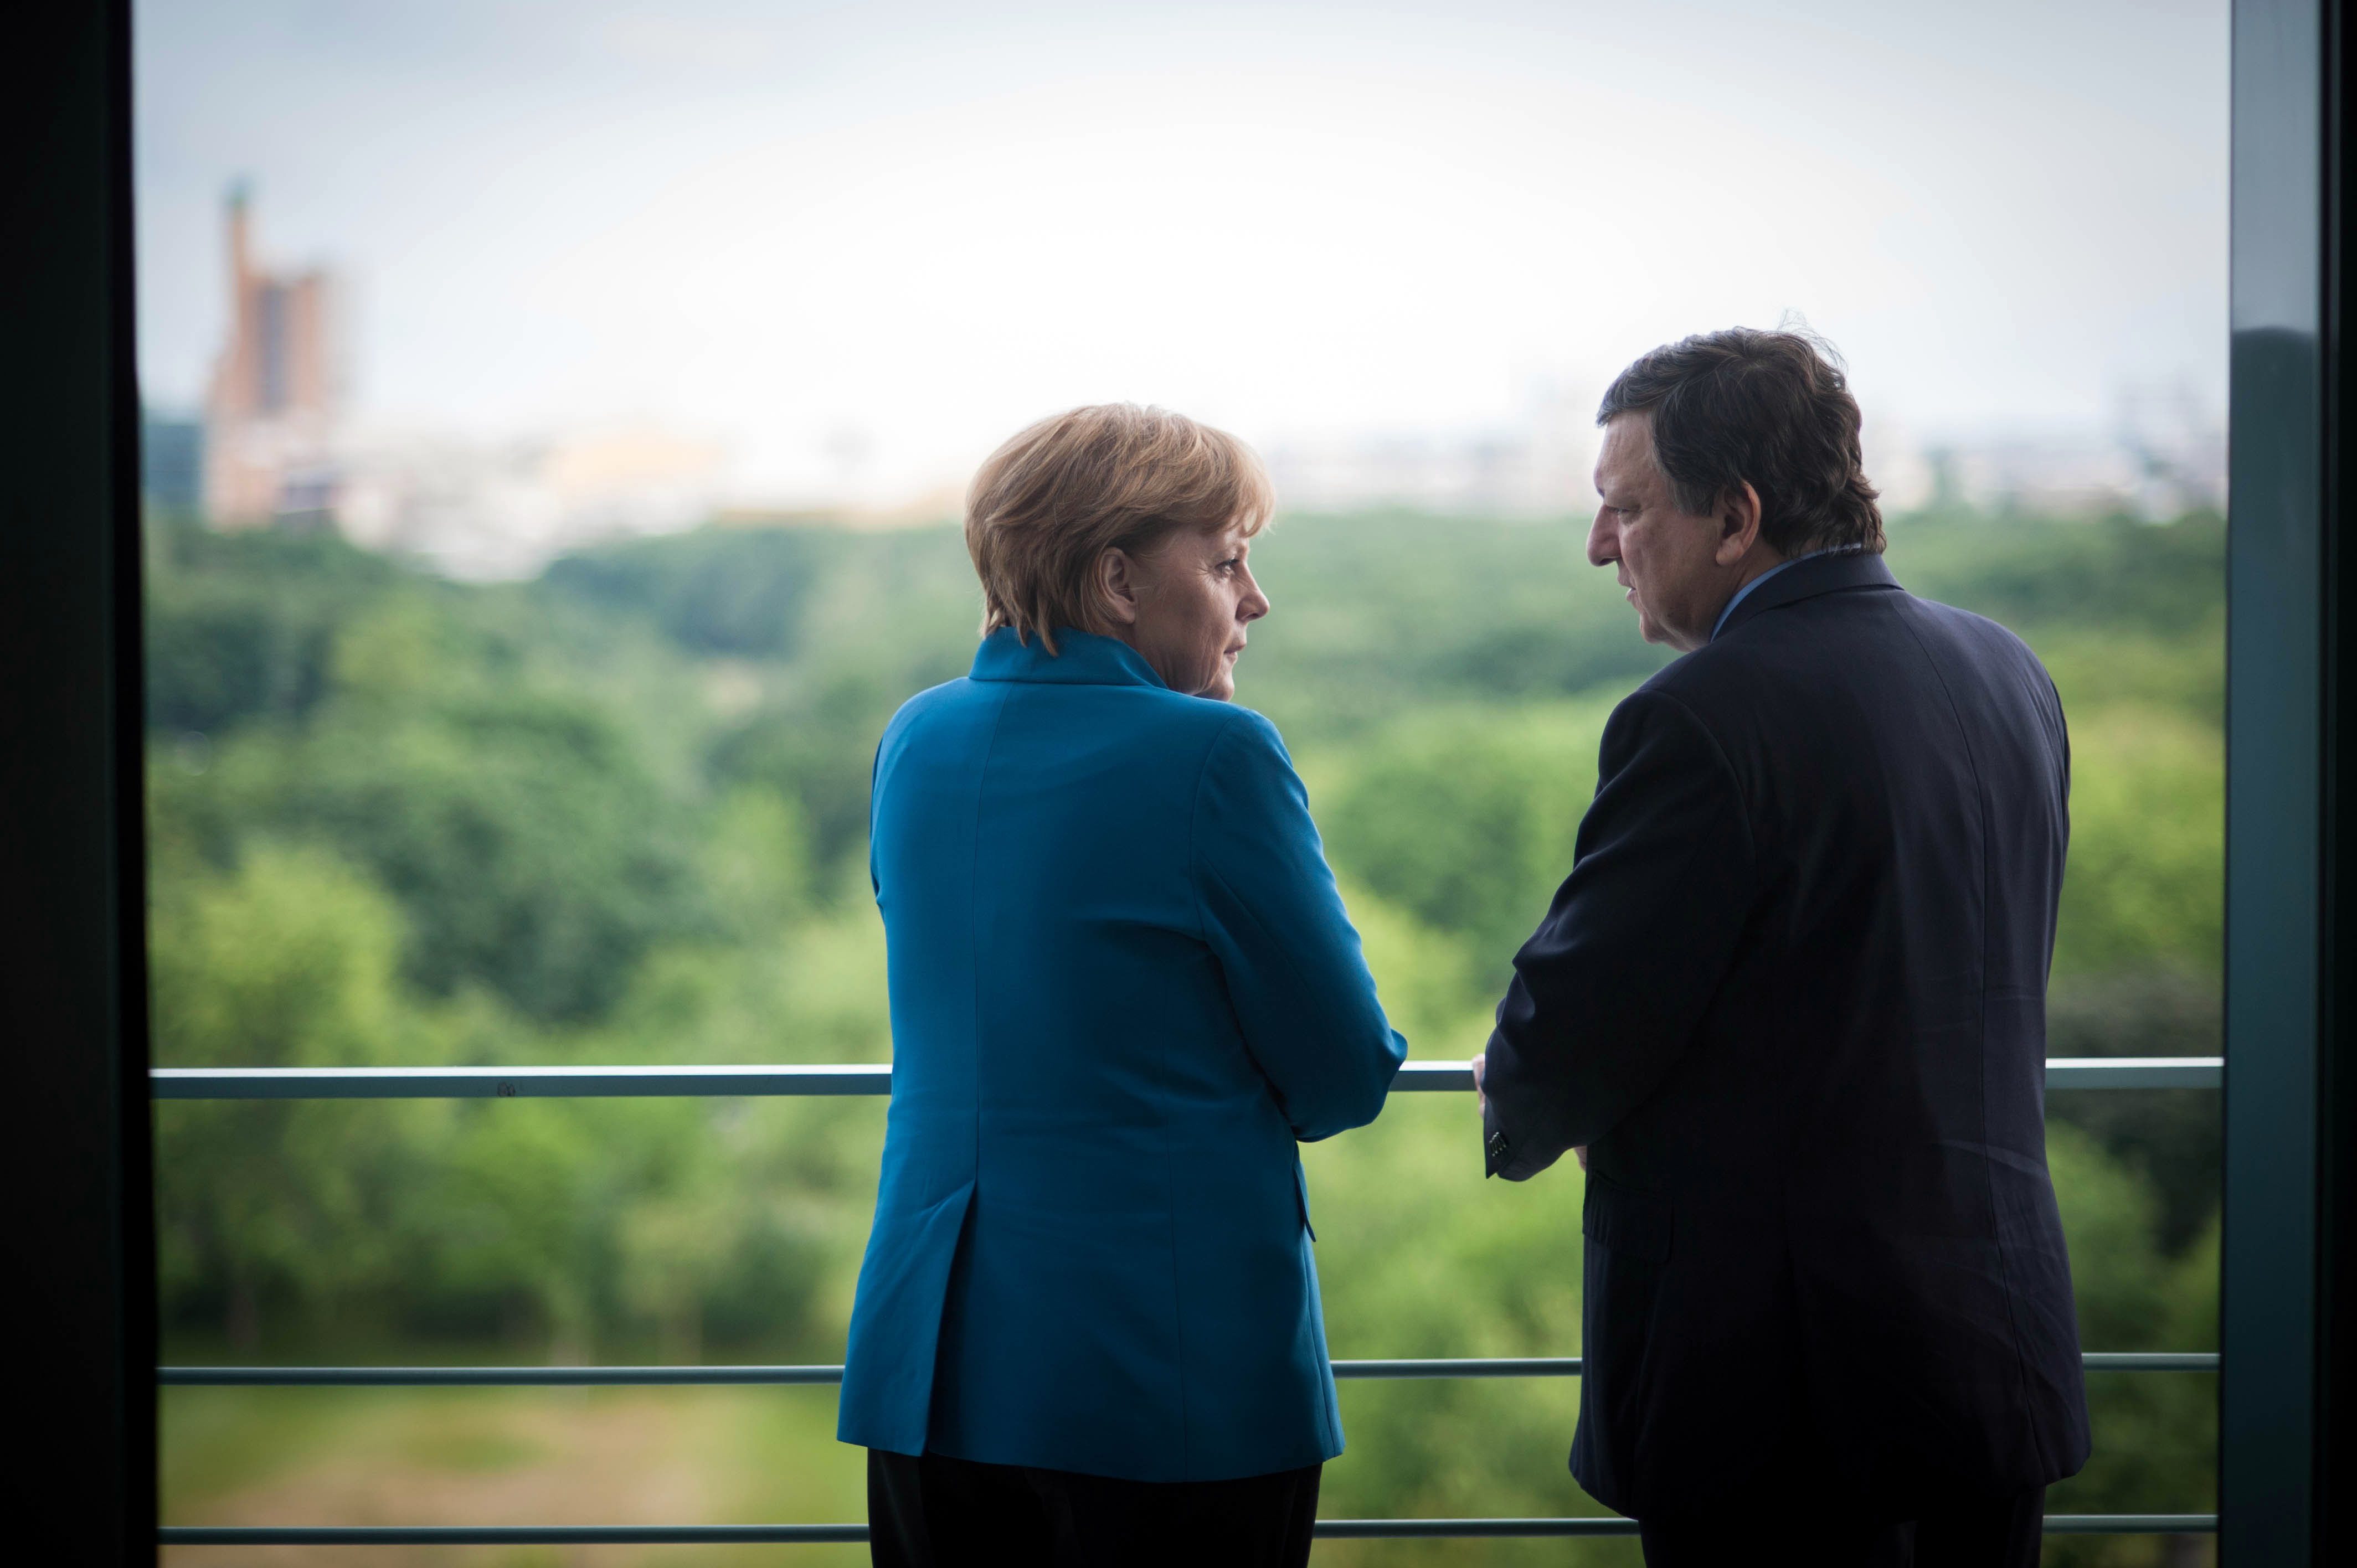 EU Commissioner Barosso Meets With Chancellor Merkel in Berlin